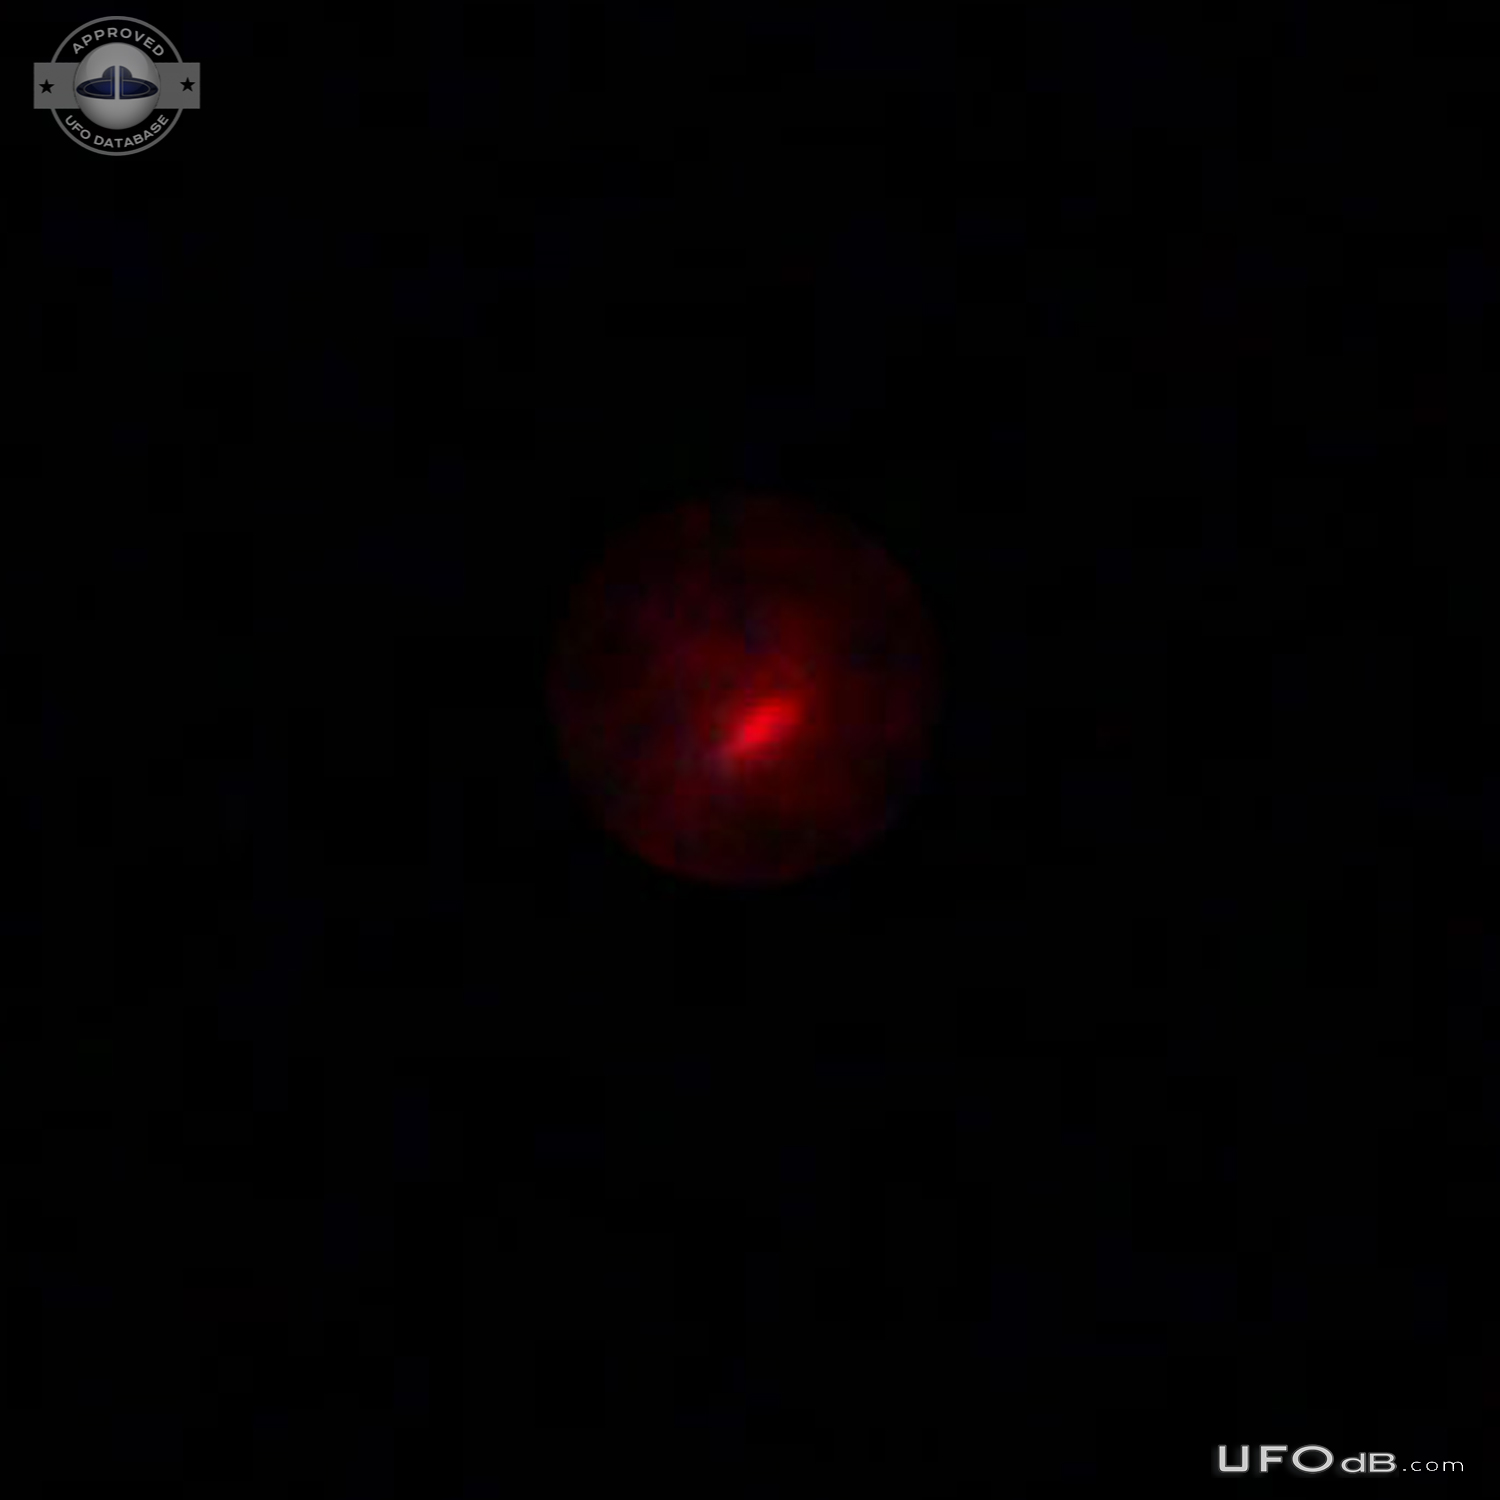 2 Red UFOs illuminating the Clouds - Toddington, Bedfordshire UK 2013 UFO Picture #653-3